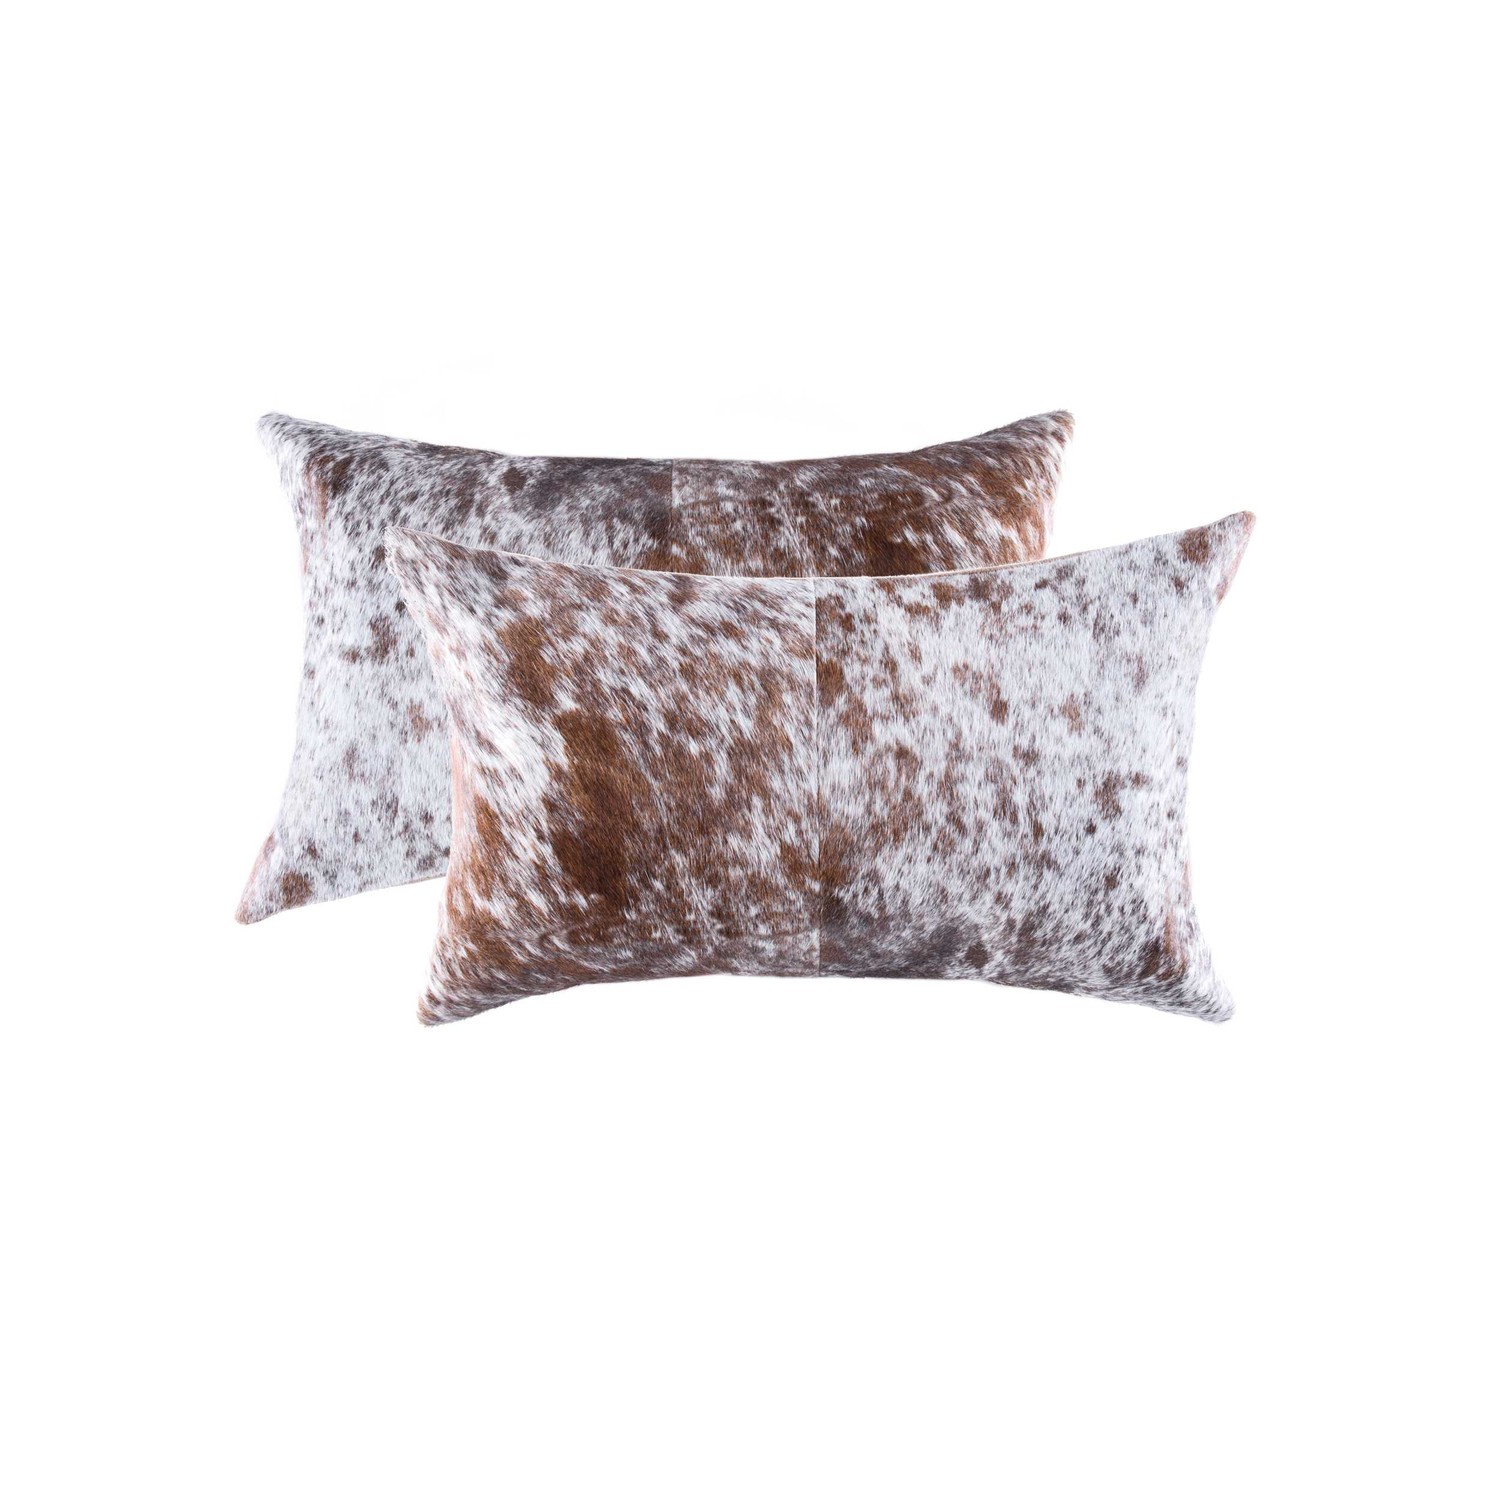 12" x 20" x 5" Salt And Pepper White And Brown, Cowhide - Pillow 2-Pack